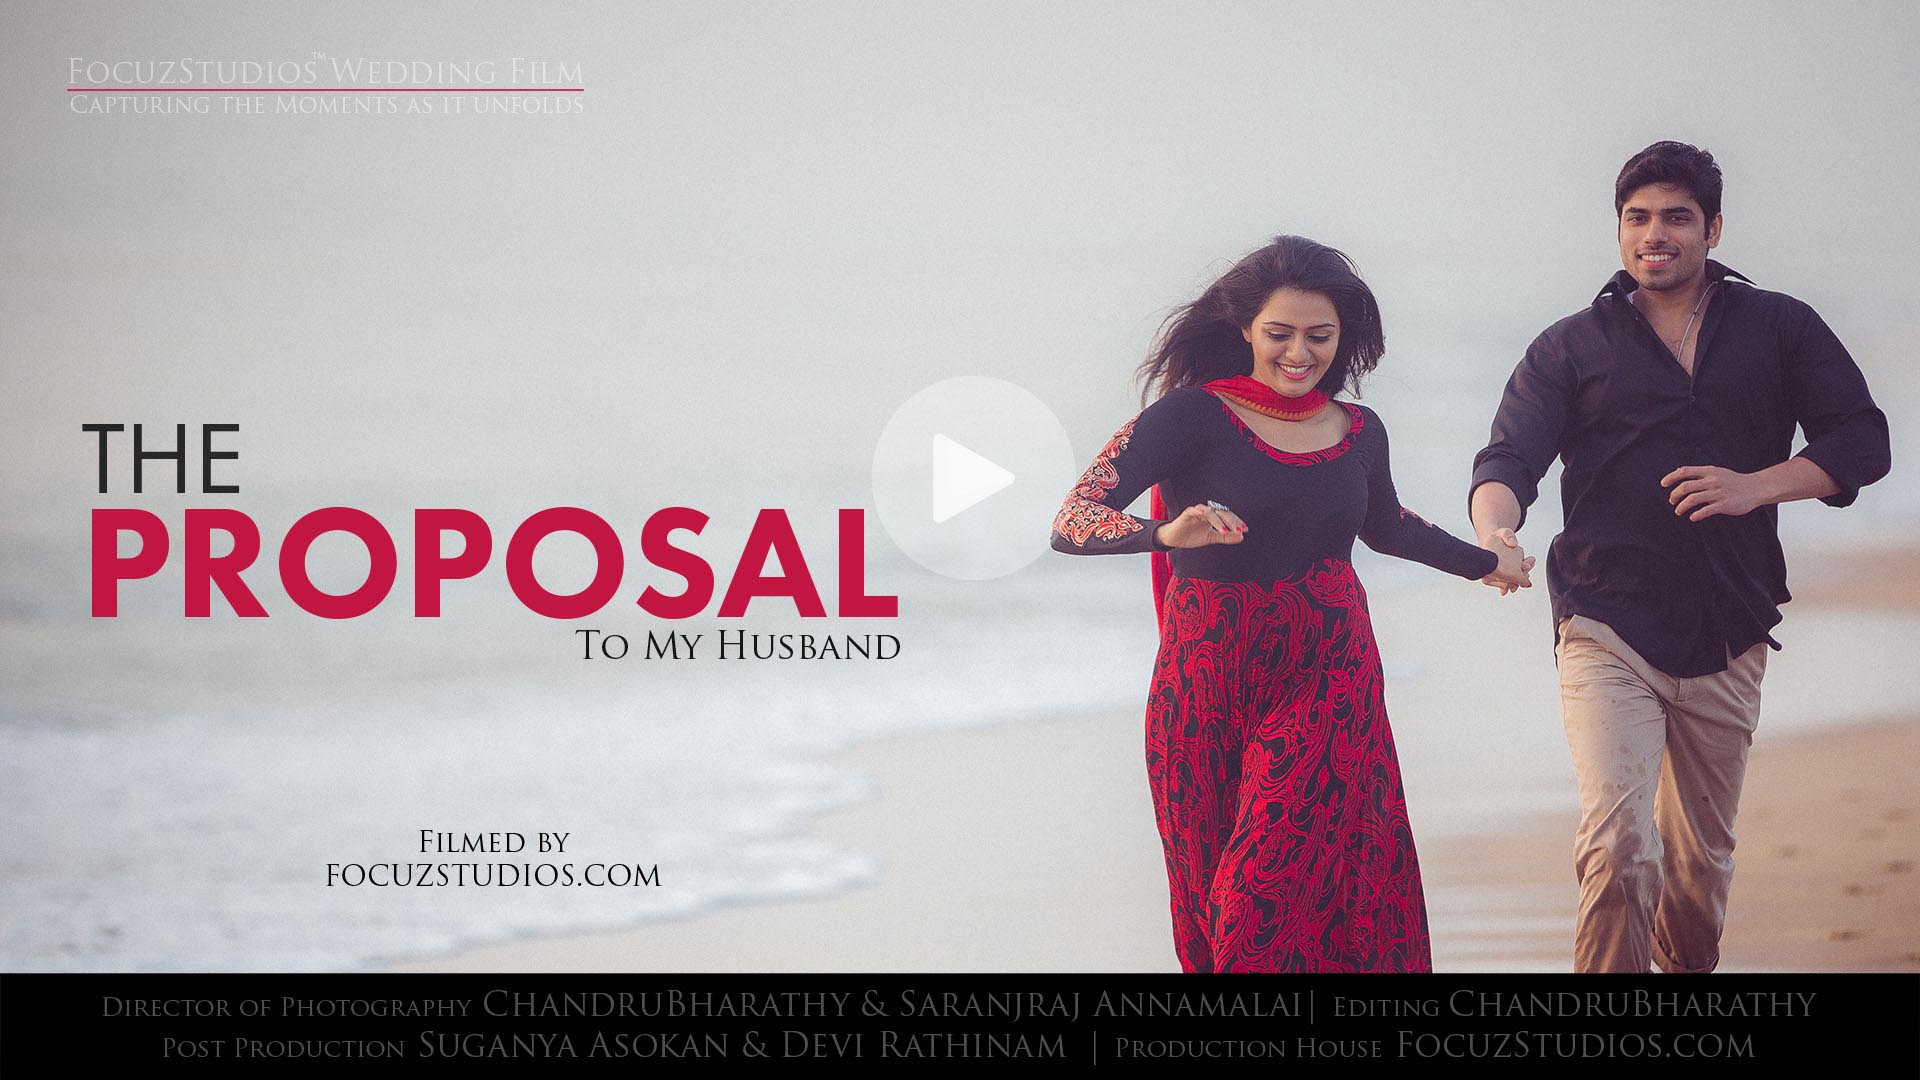 Best LOVE Proposal in Tamil